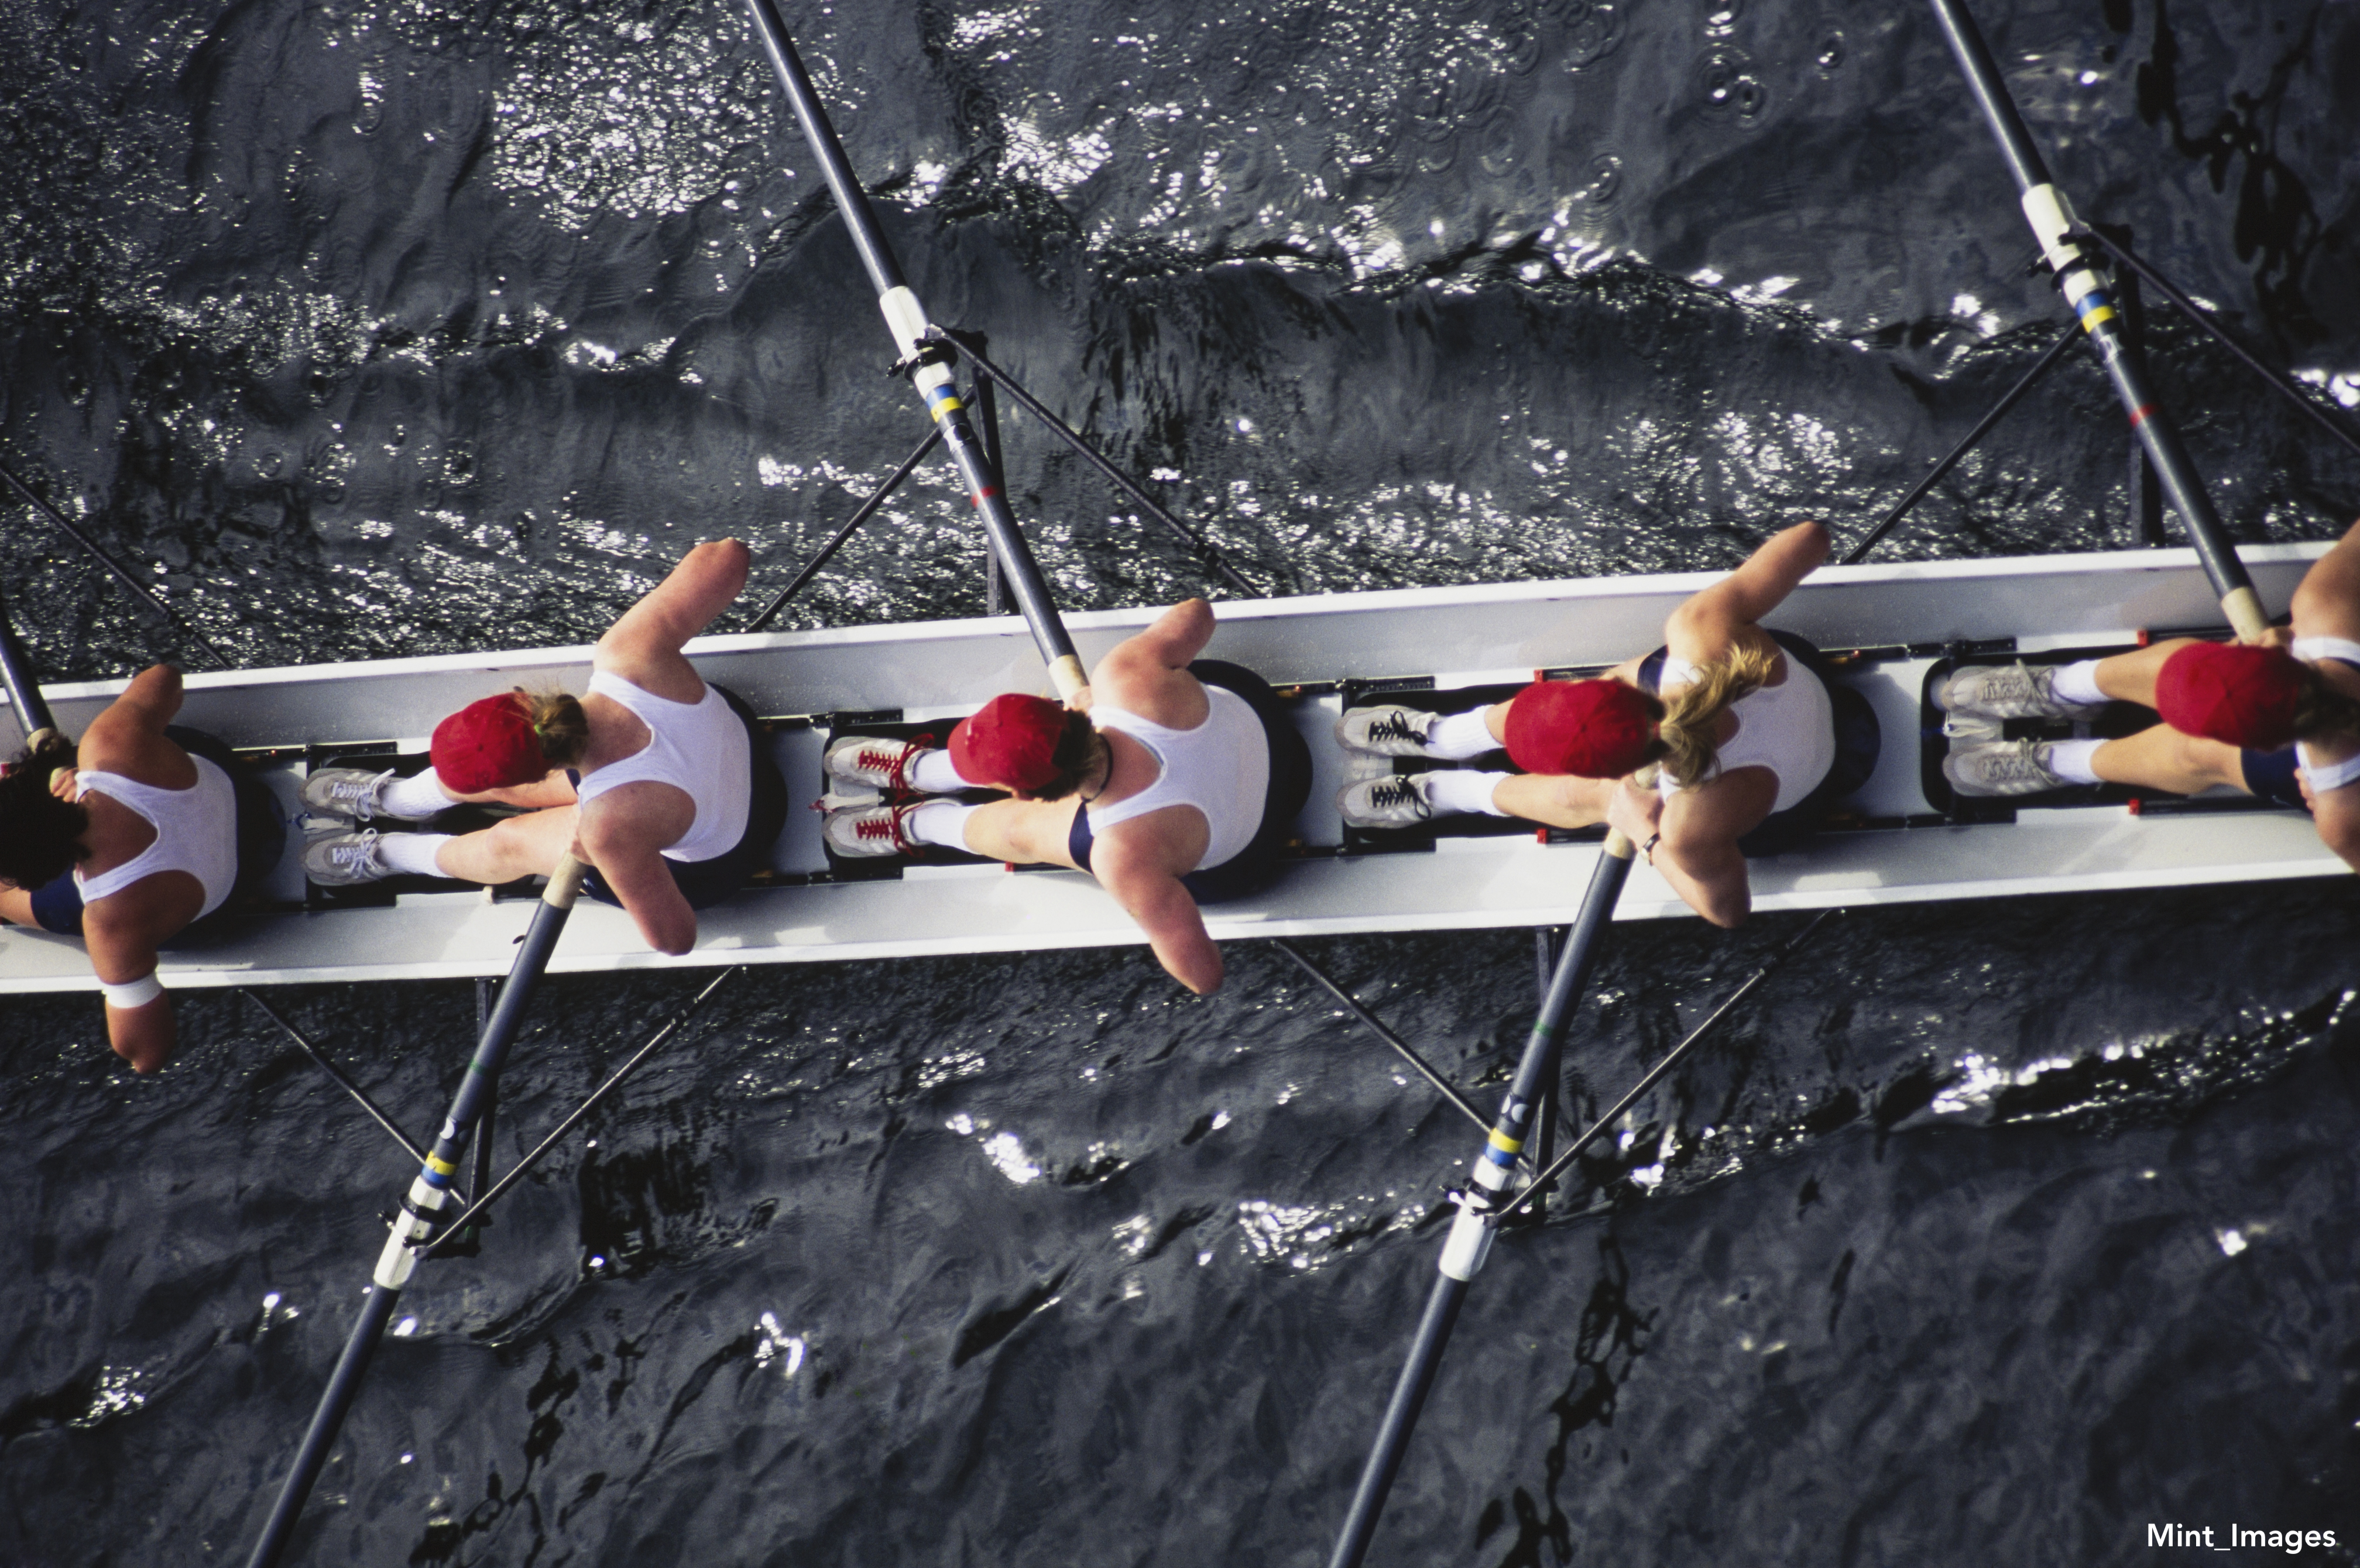 rowing-team-on-the-water-synchronizing